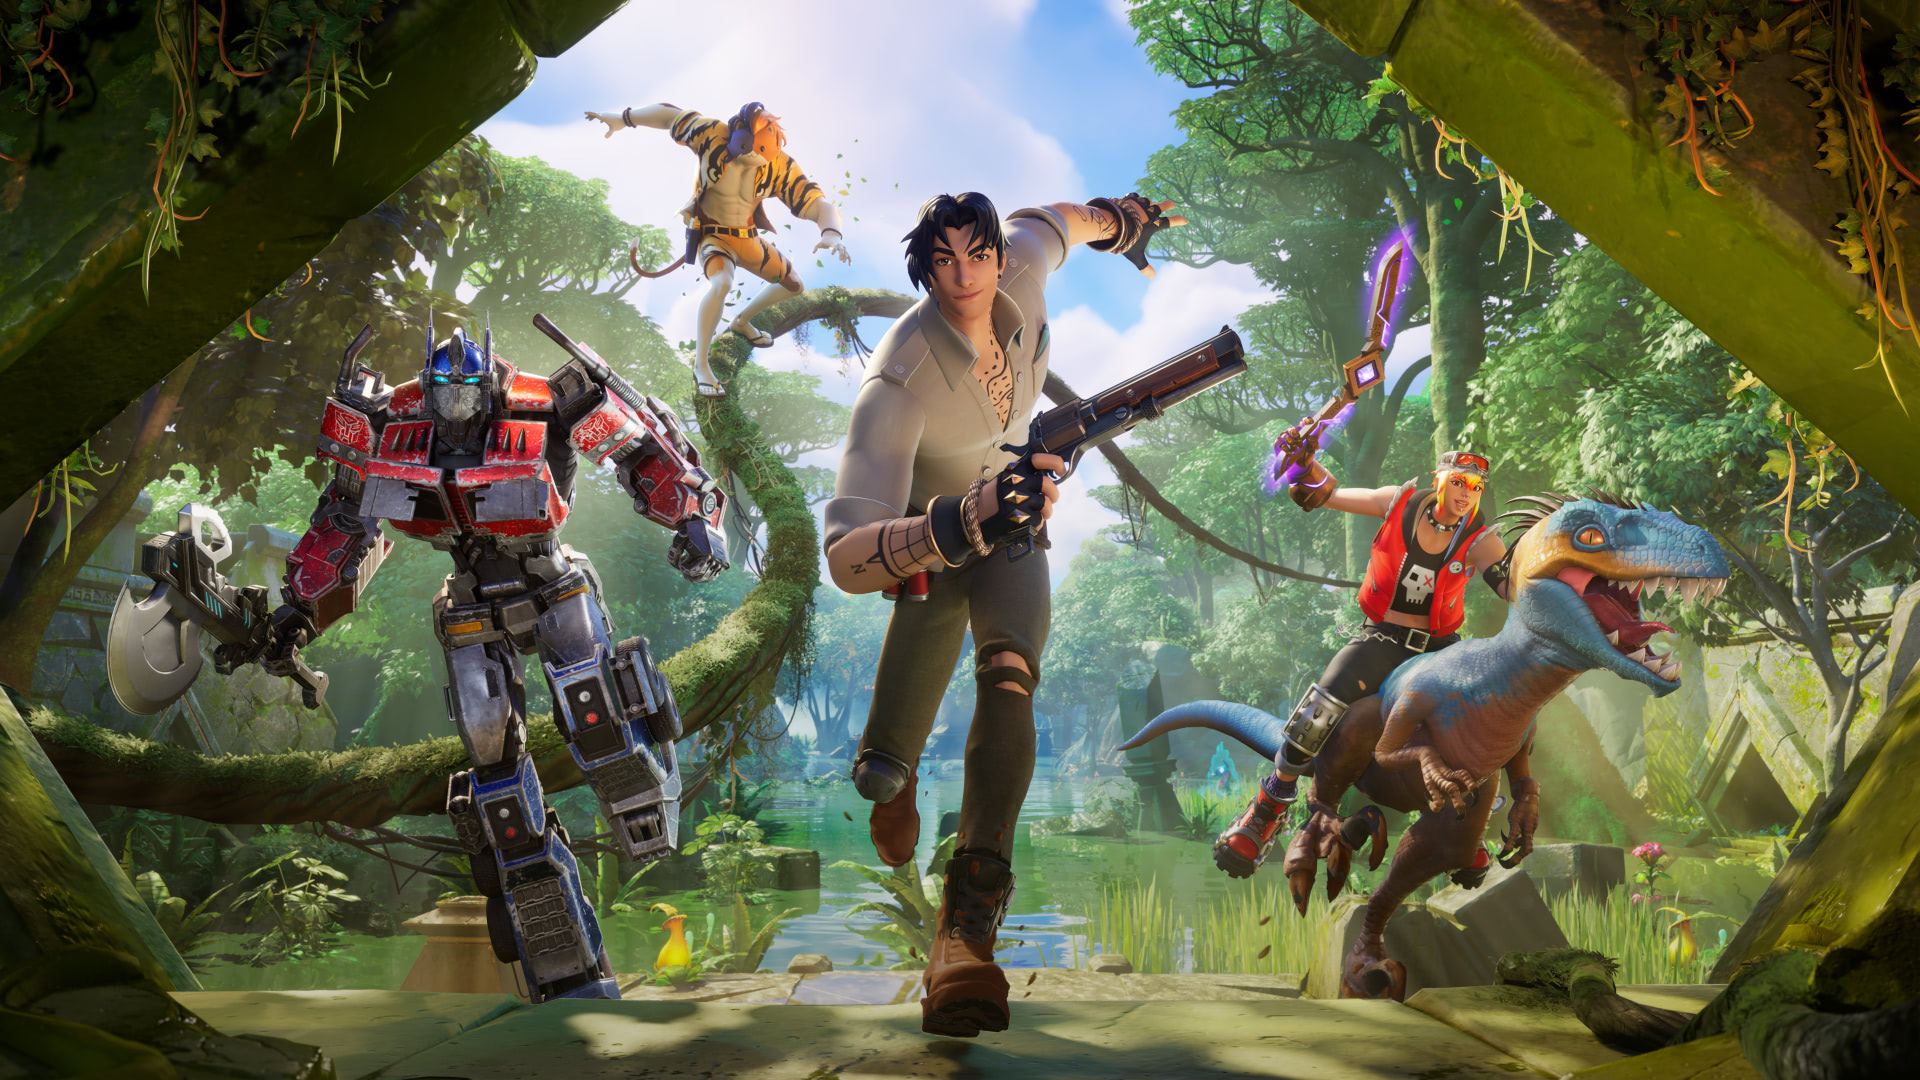 Several Fortnite characters run toward the screen, one has a pistol in his hands, the other is riding a raptor, the other is Optimus Prime.